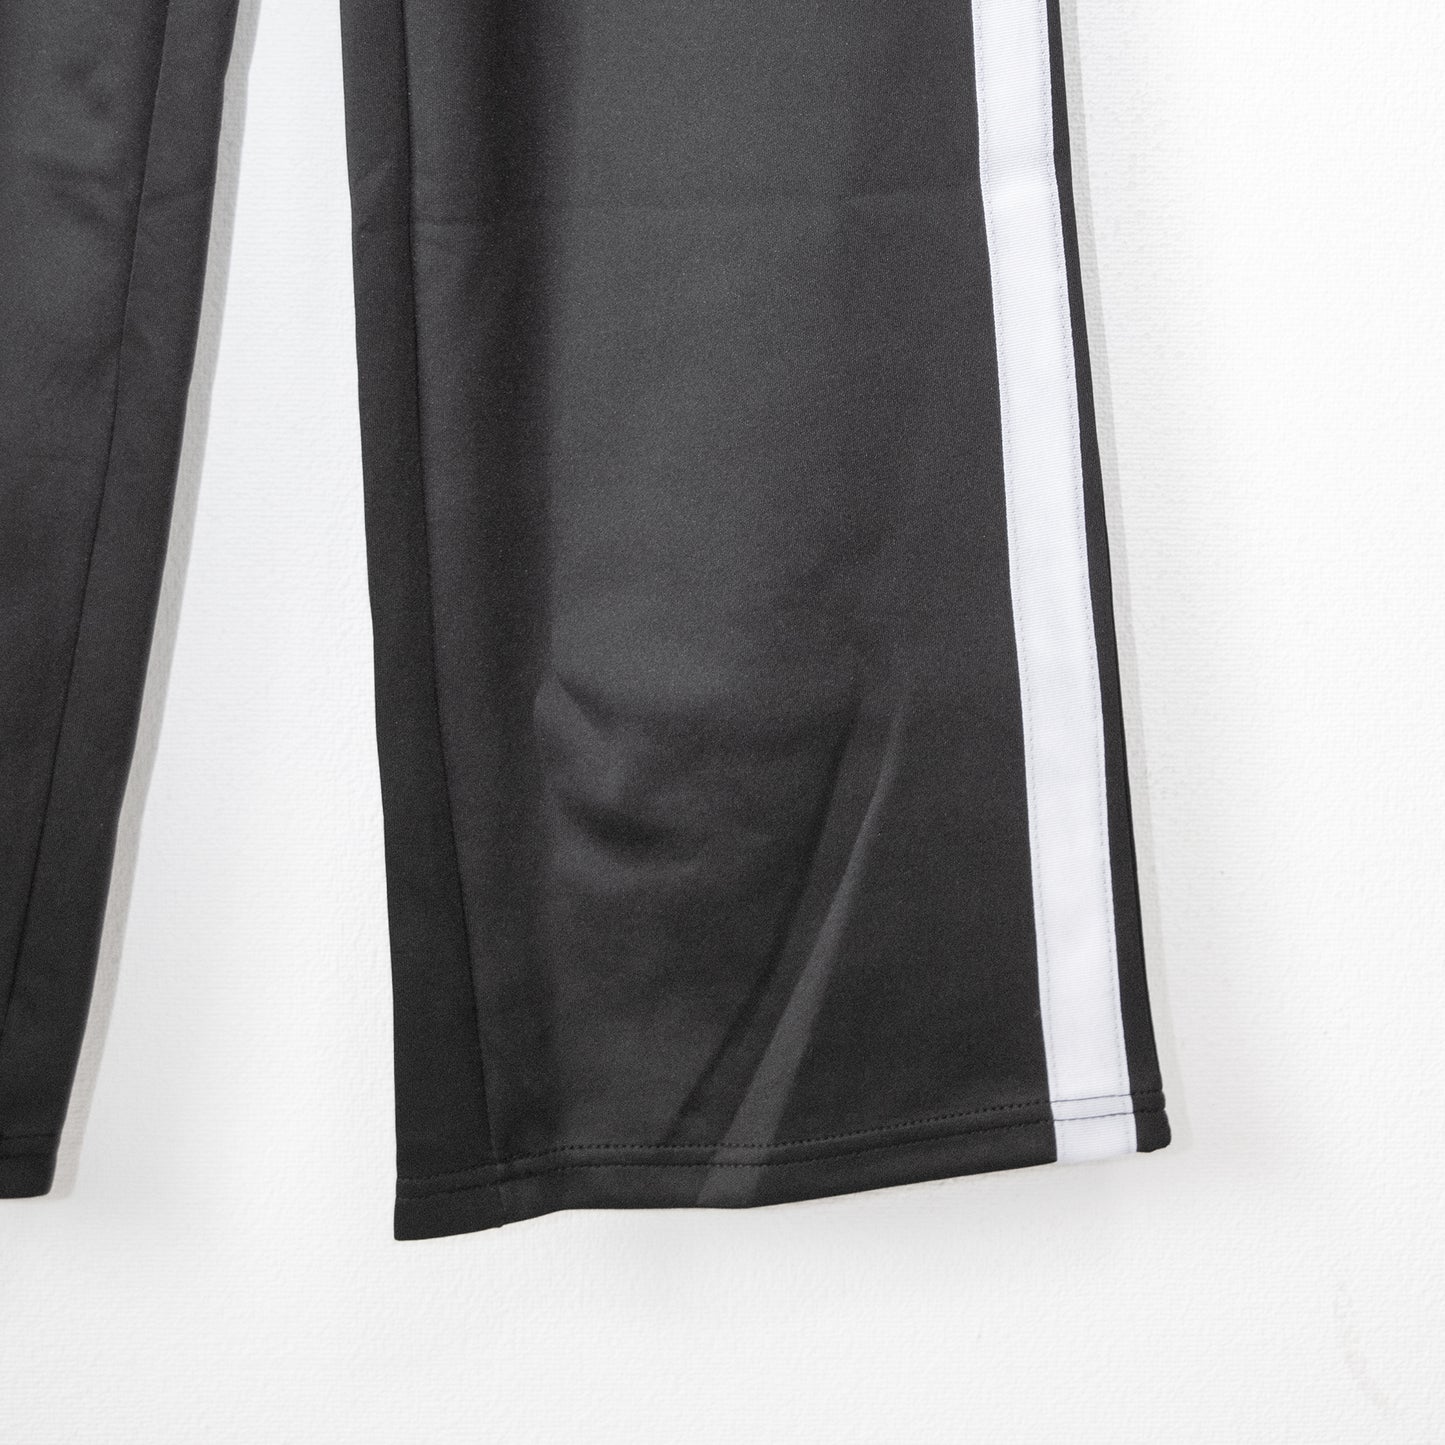 ACDC RAG Side Double Line Jersey Long Pants BLACK